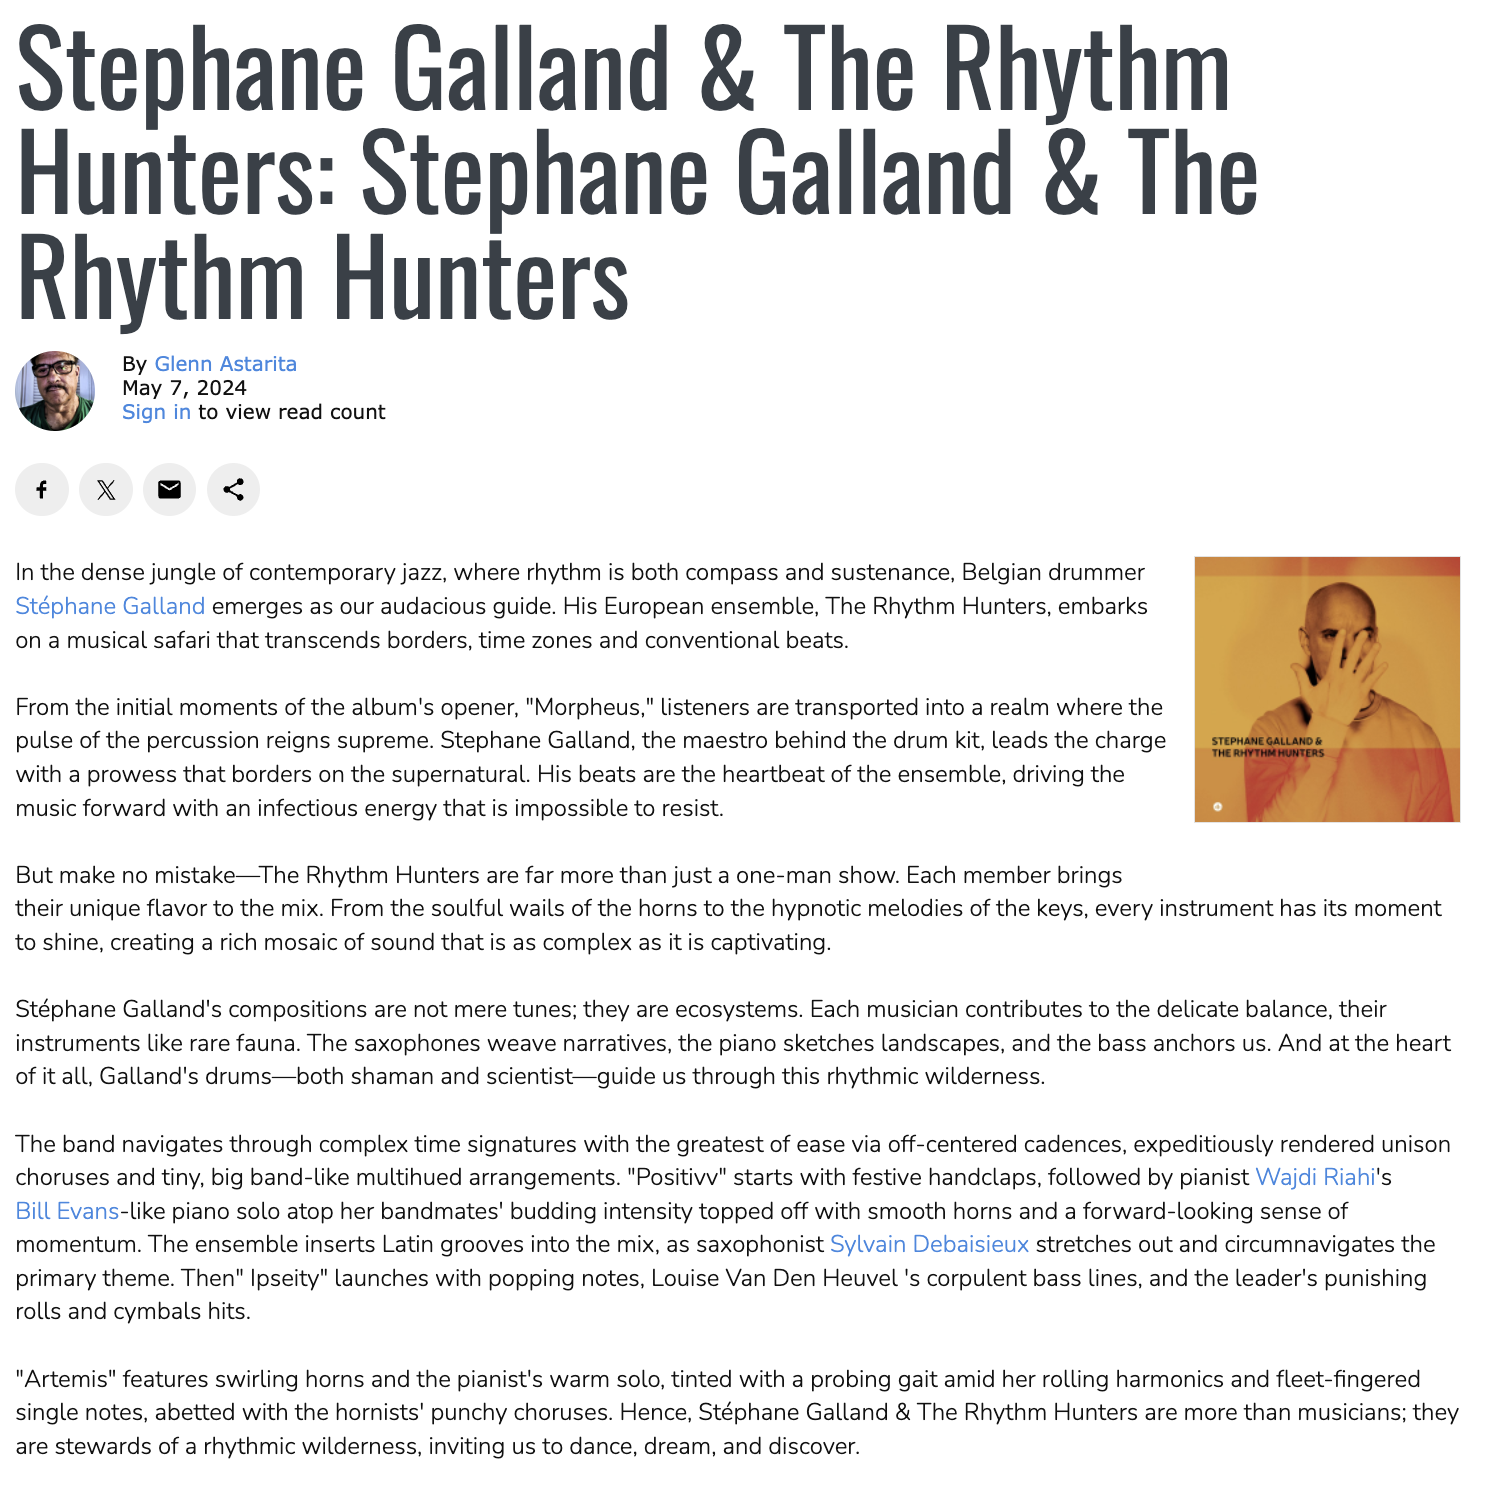 Stéphane Galland & The Rhythm Hunters album review All About Jazz